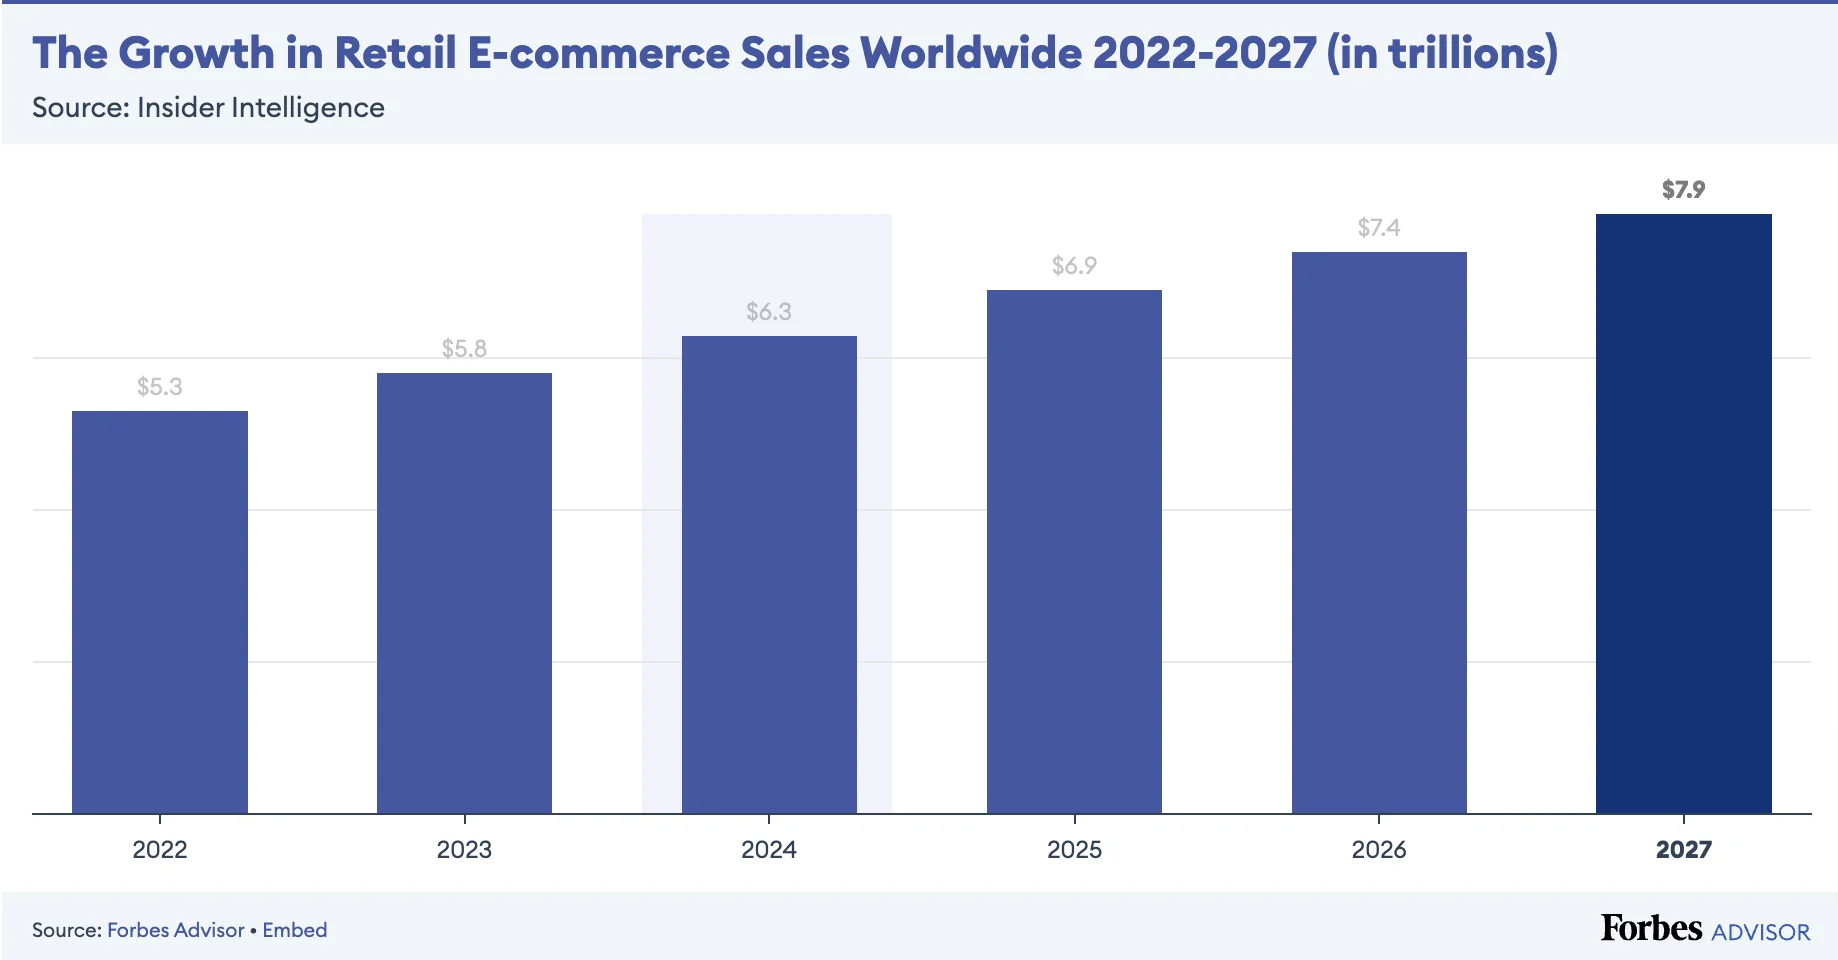 Ecommerce growth is expected to grow by $7.9 trillion in 2027